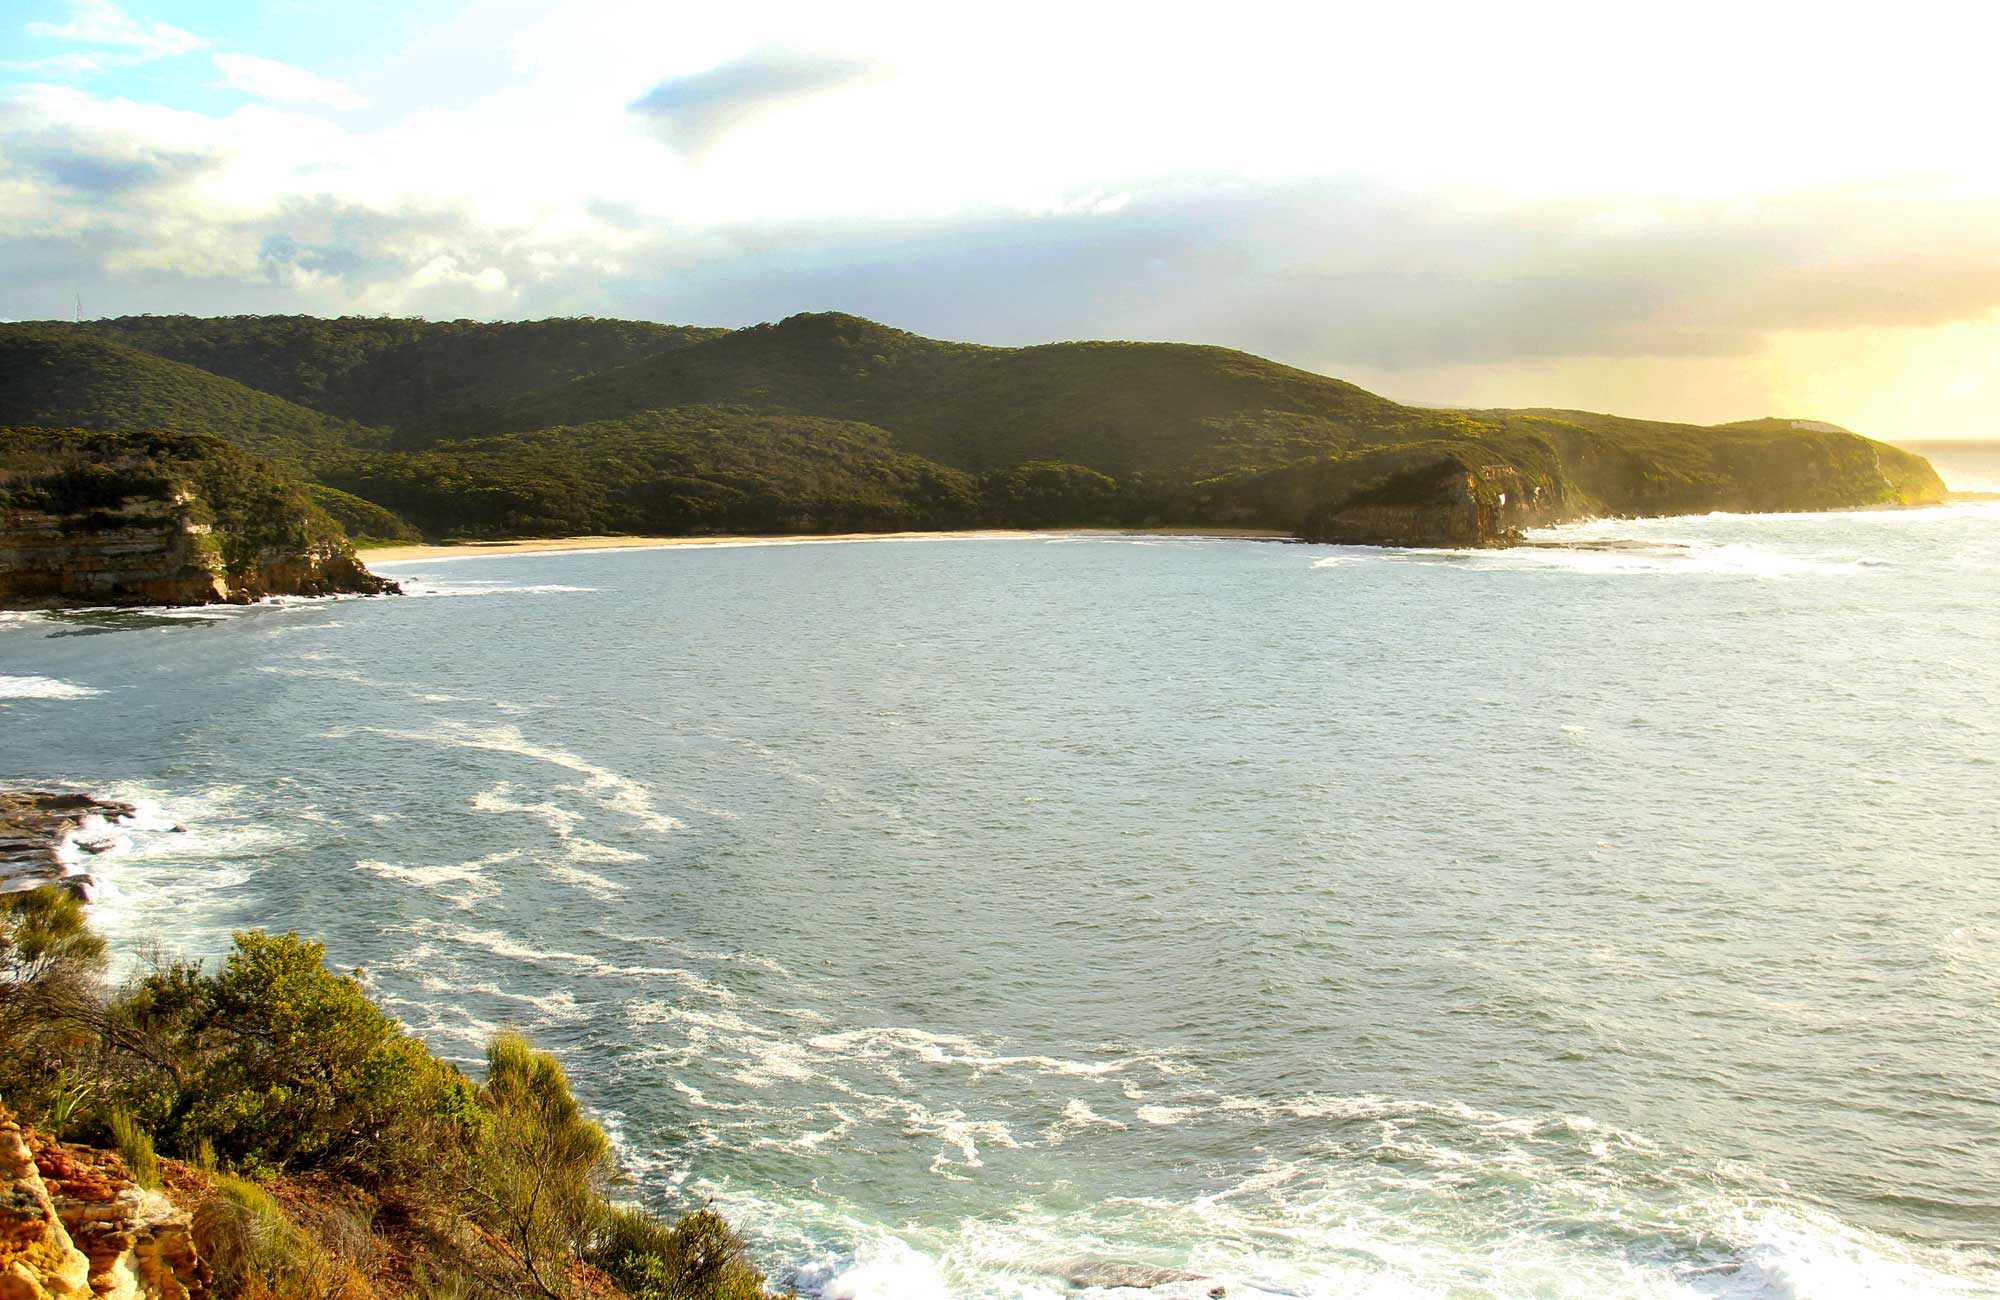 The view from the lookout along the coast. Photo: John Yurasek